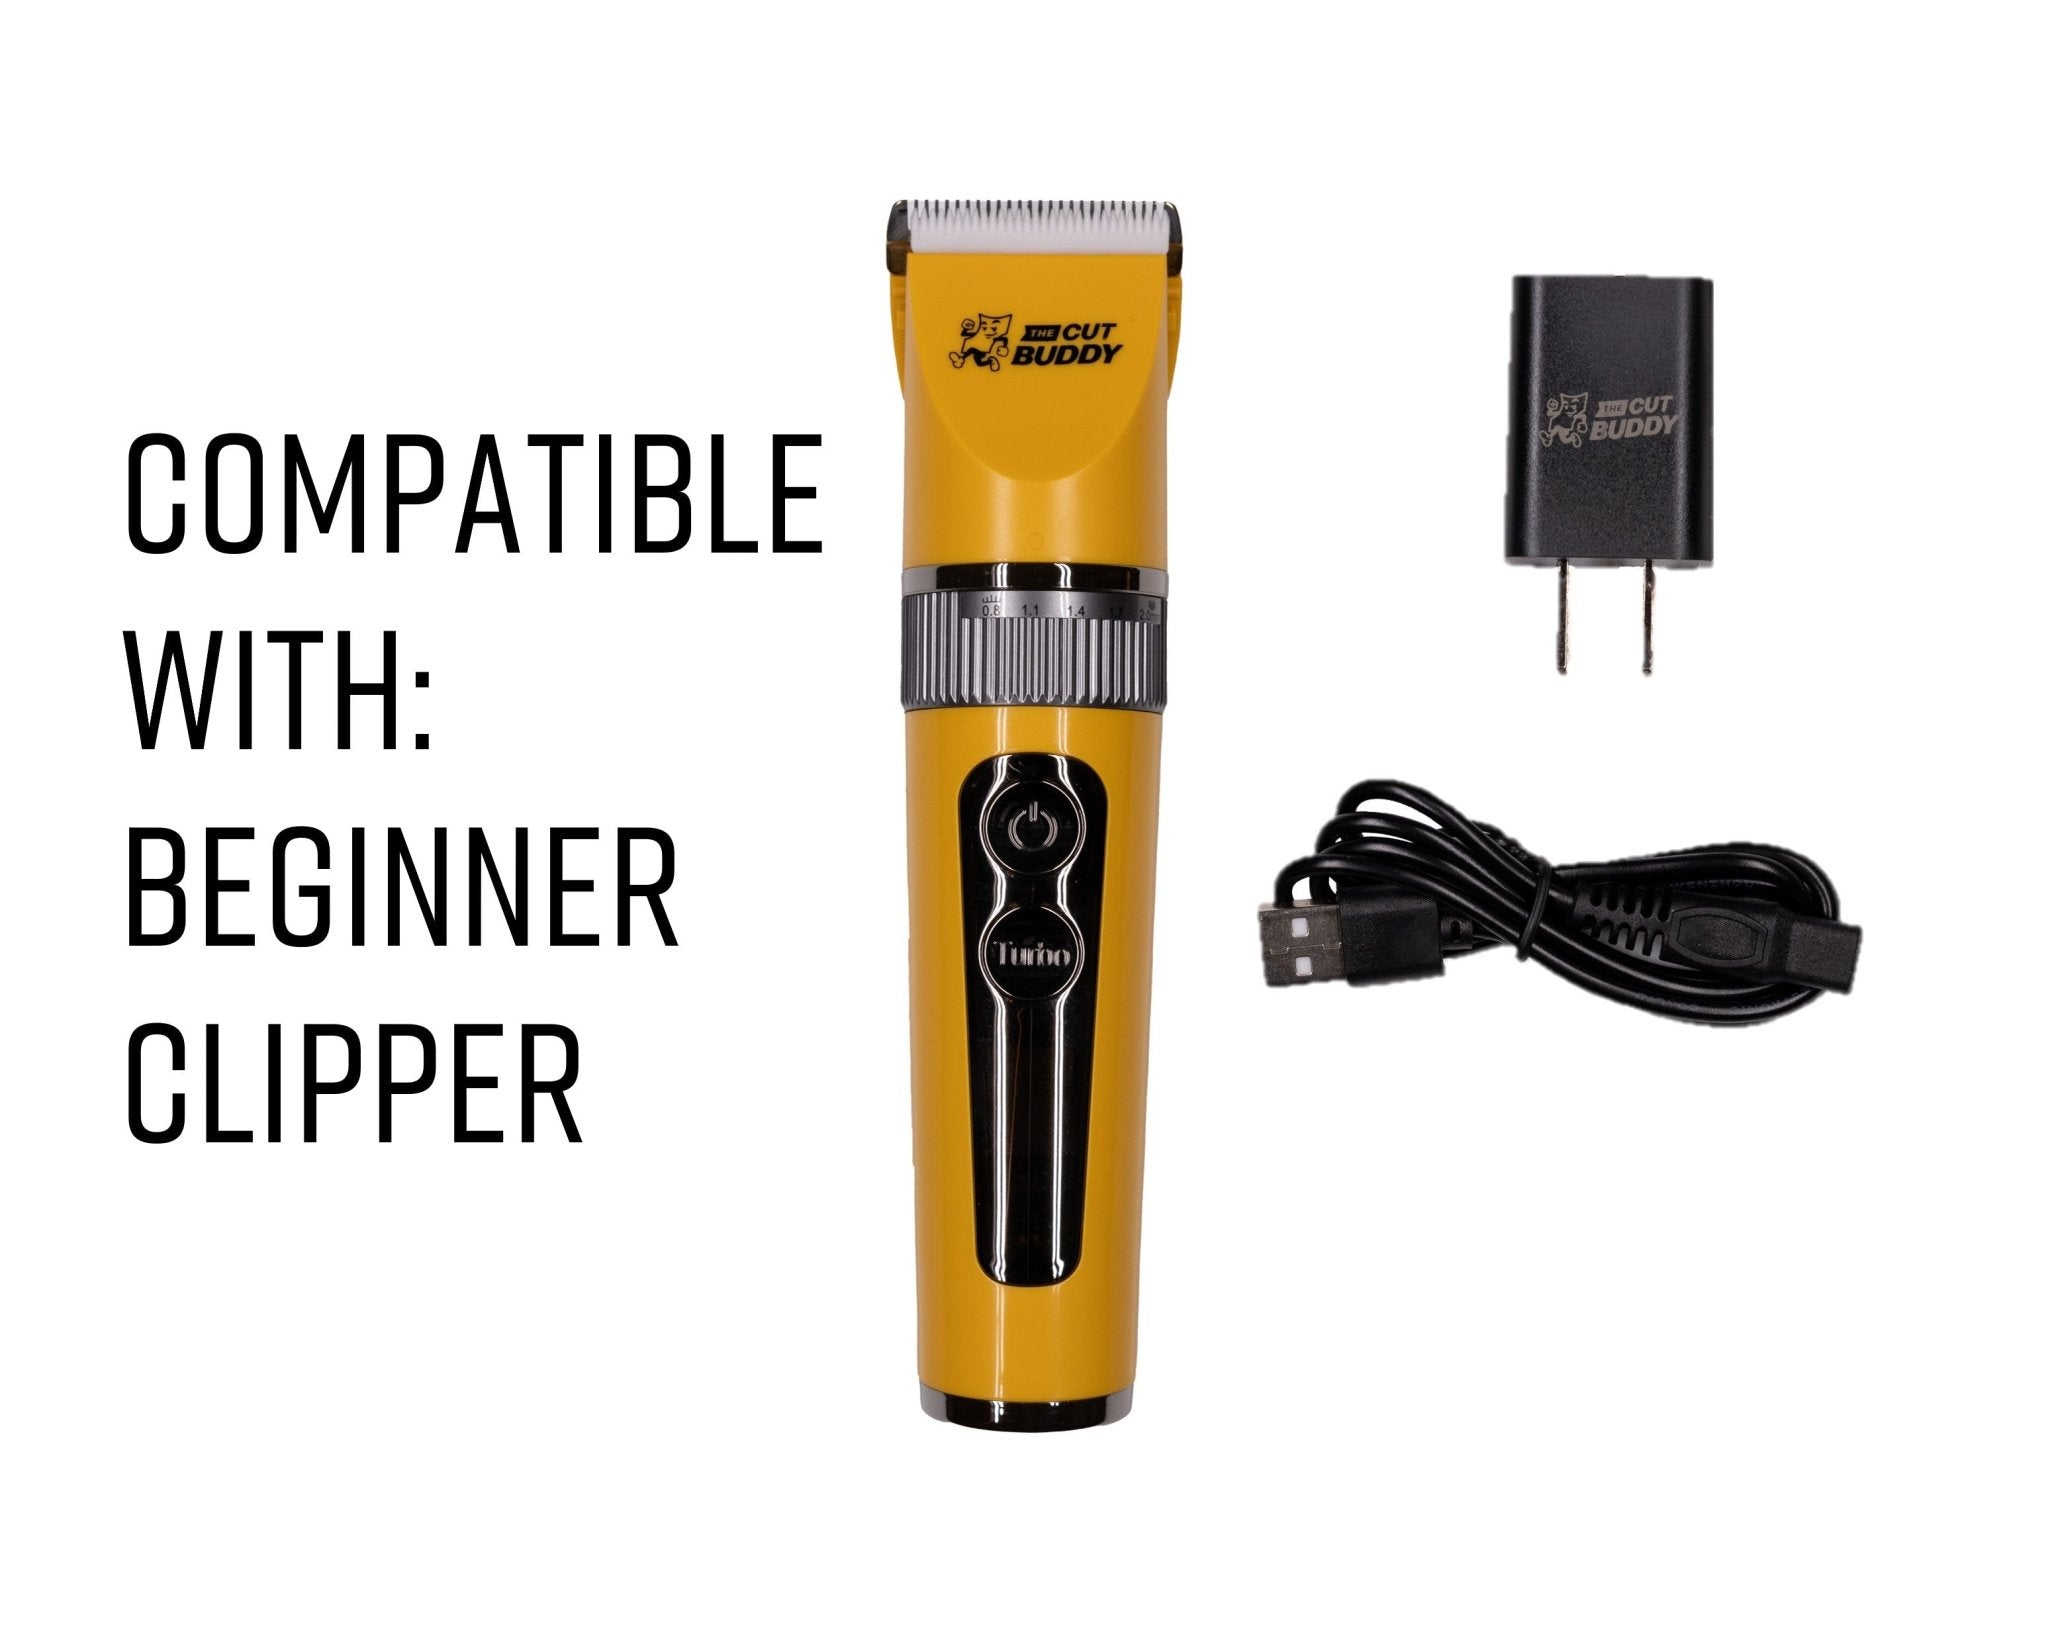 Charger and Adapter for Beginners Clipper